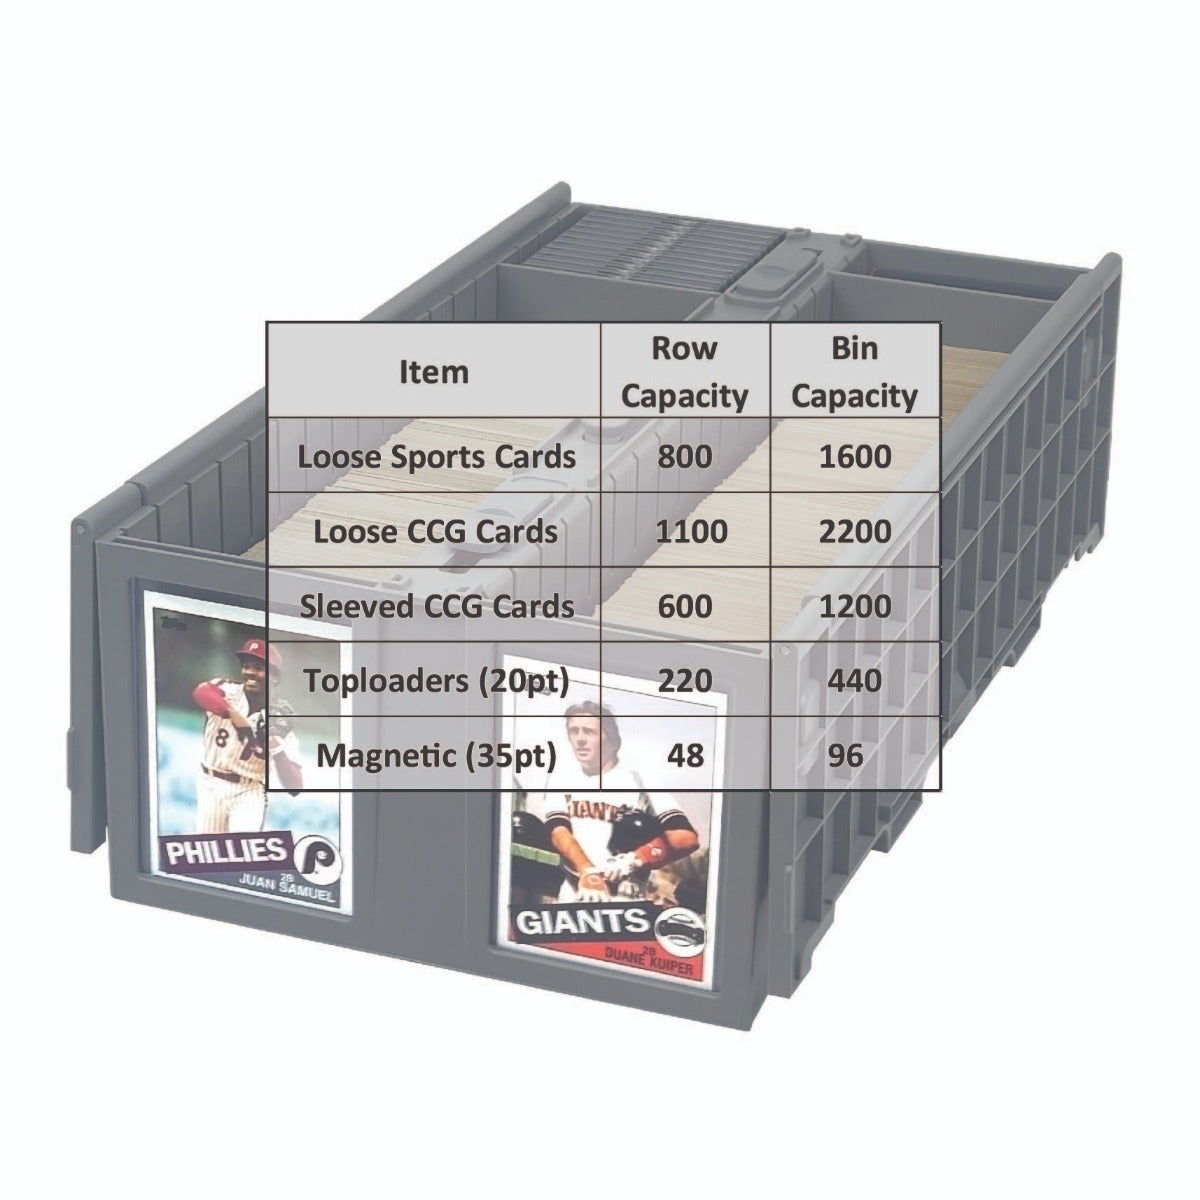 Card Storage Box Capacity table overlaid on Gray storage box - 1600 sports cards - 2200 trading cards -- 1200 sleeved trading cards